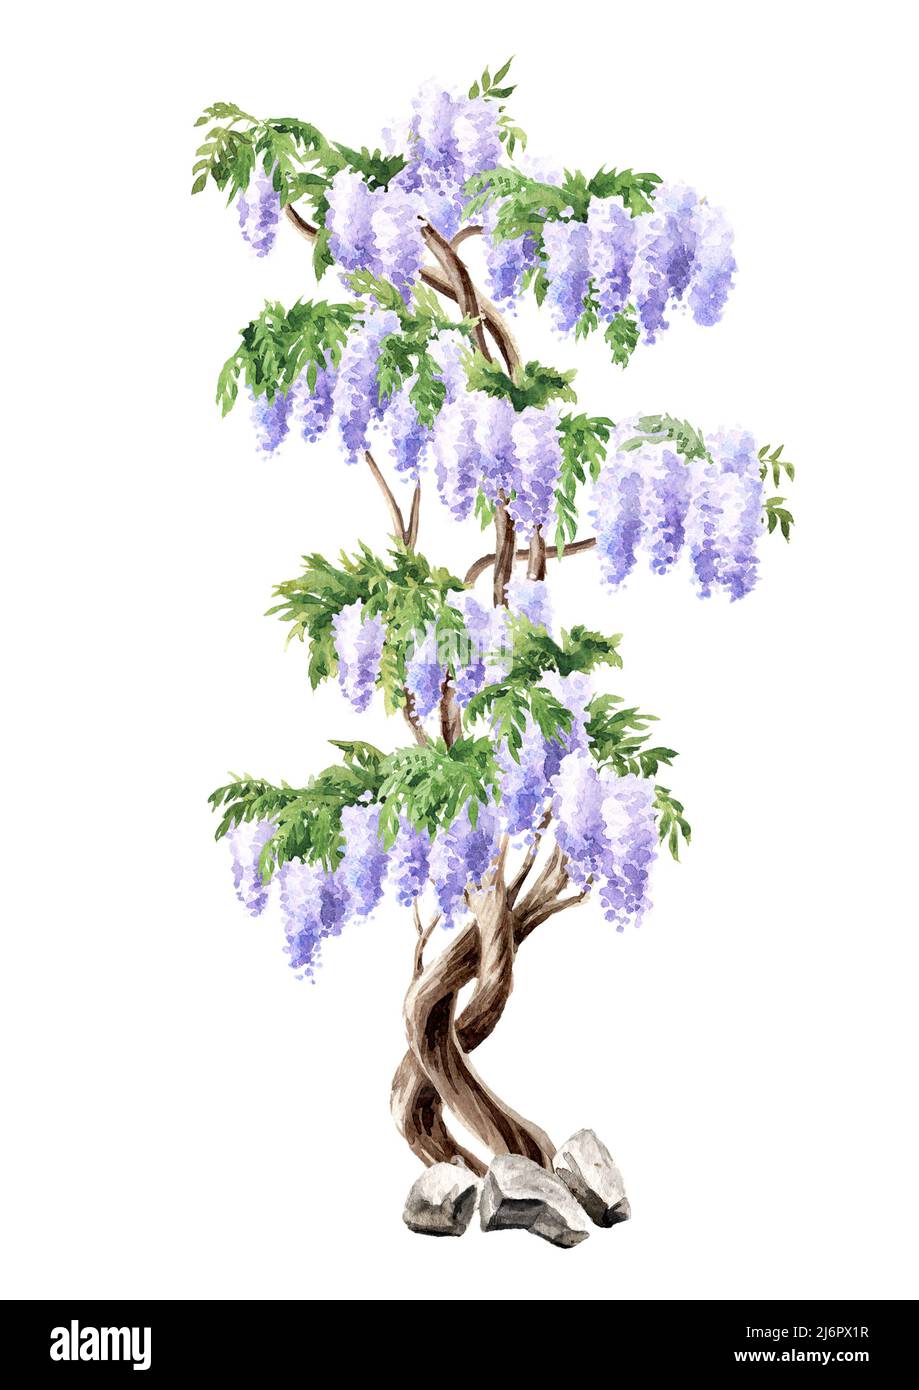 Wisteria blossom tree,  Hand  drawn watercolor  illustration isolated on white background Stock Photo